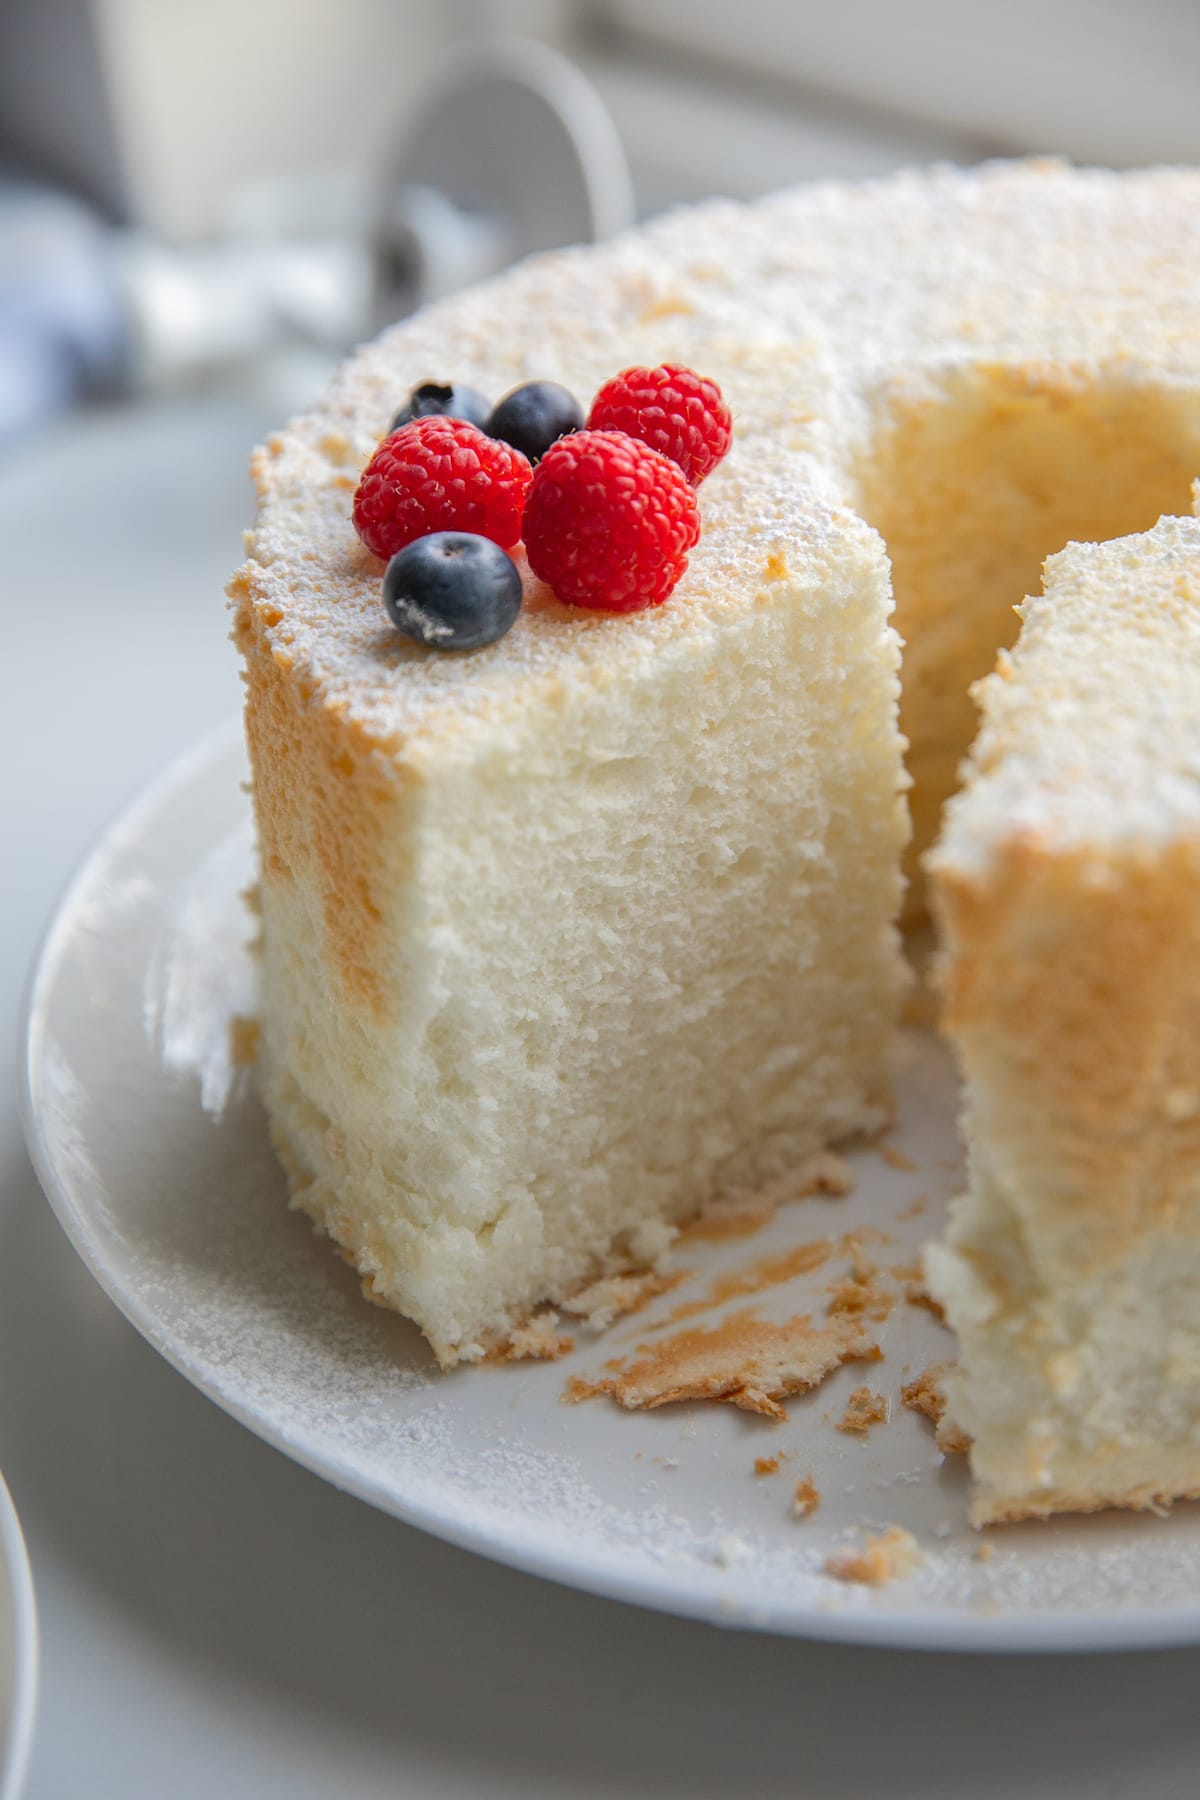 whole angel food cake with fresh berries as garnish